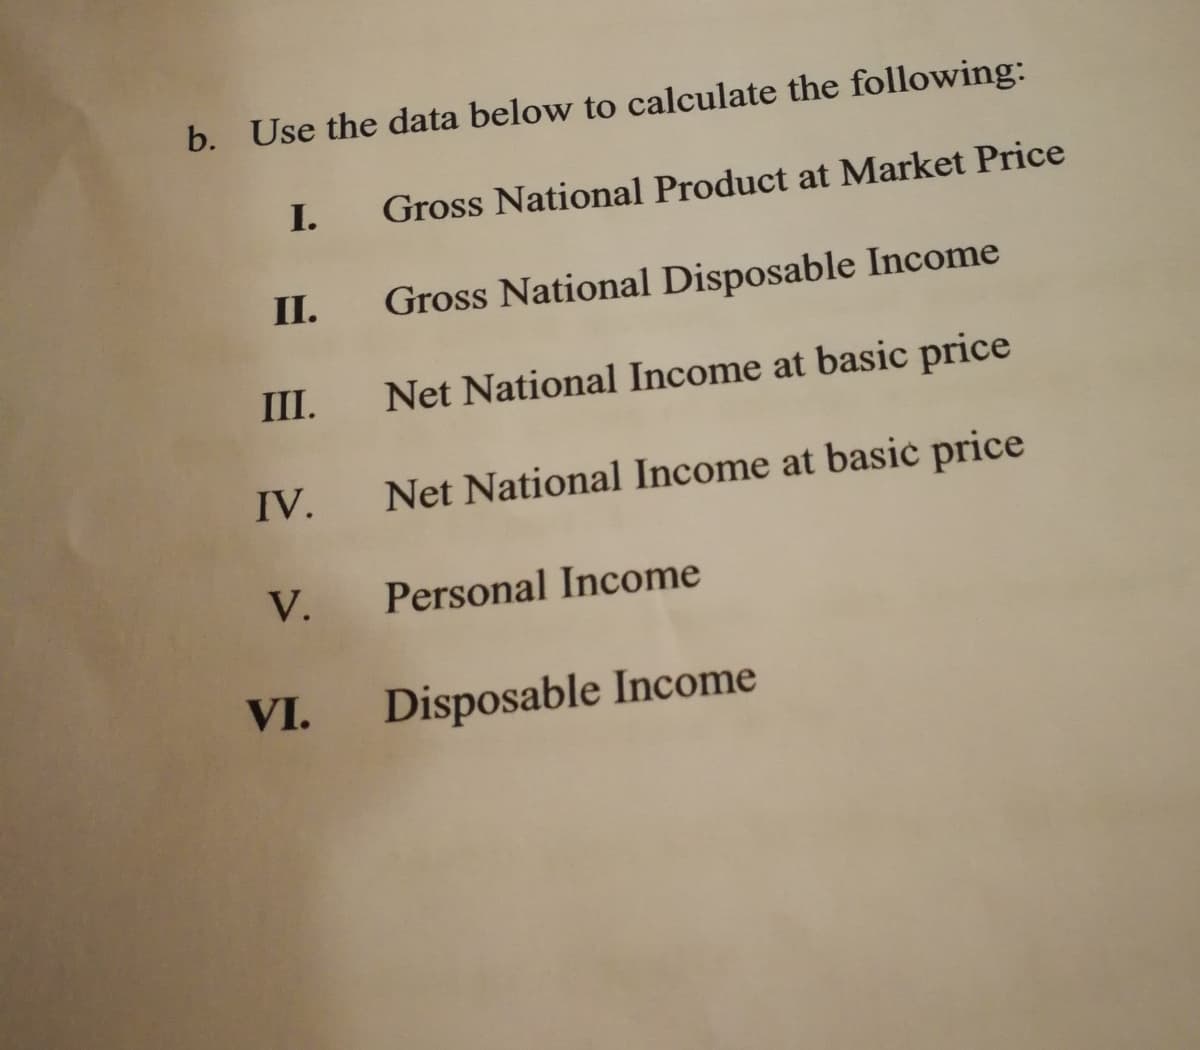 b. Use the data below to calculate the following:
I.
Gross National Product at Market Price
II.
Gross National Disposable Income
III.
Net National Income at basic price
IV. Net National Income at basic price
V.
Personal Income
VI.
Disposable Income
